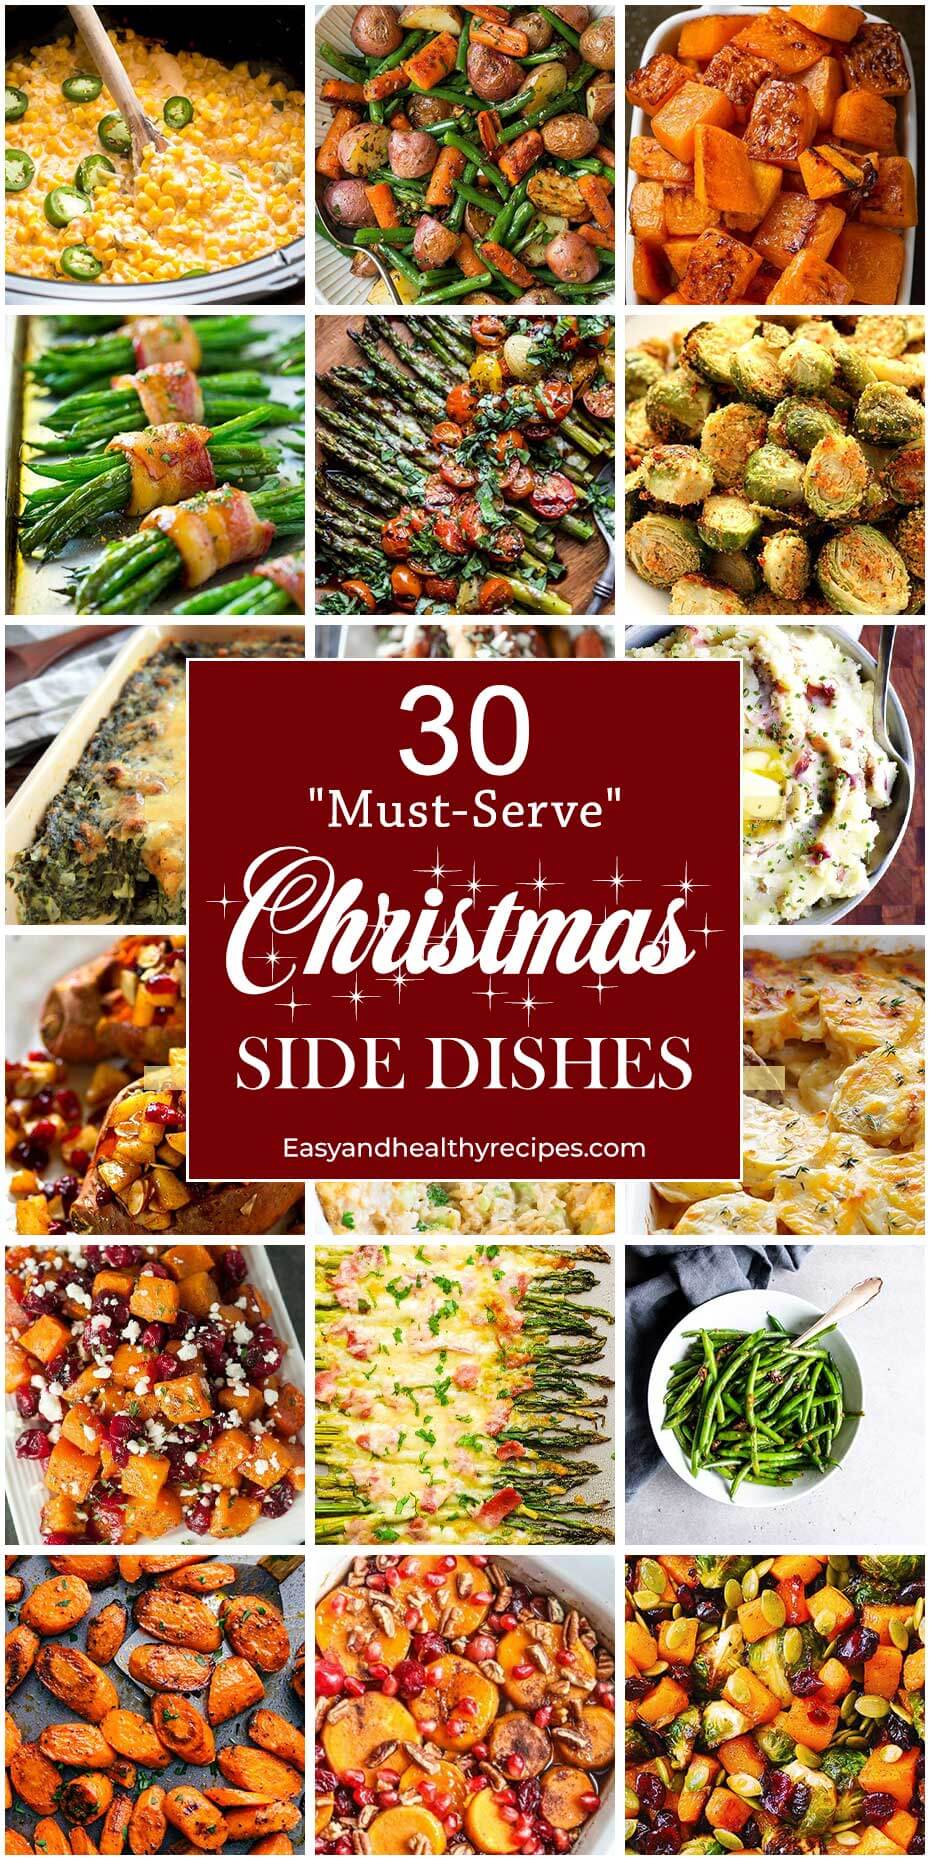 30 "Must-Serve" Christmas Side Dishes - Easy and Healthy Recipes